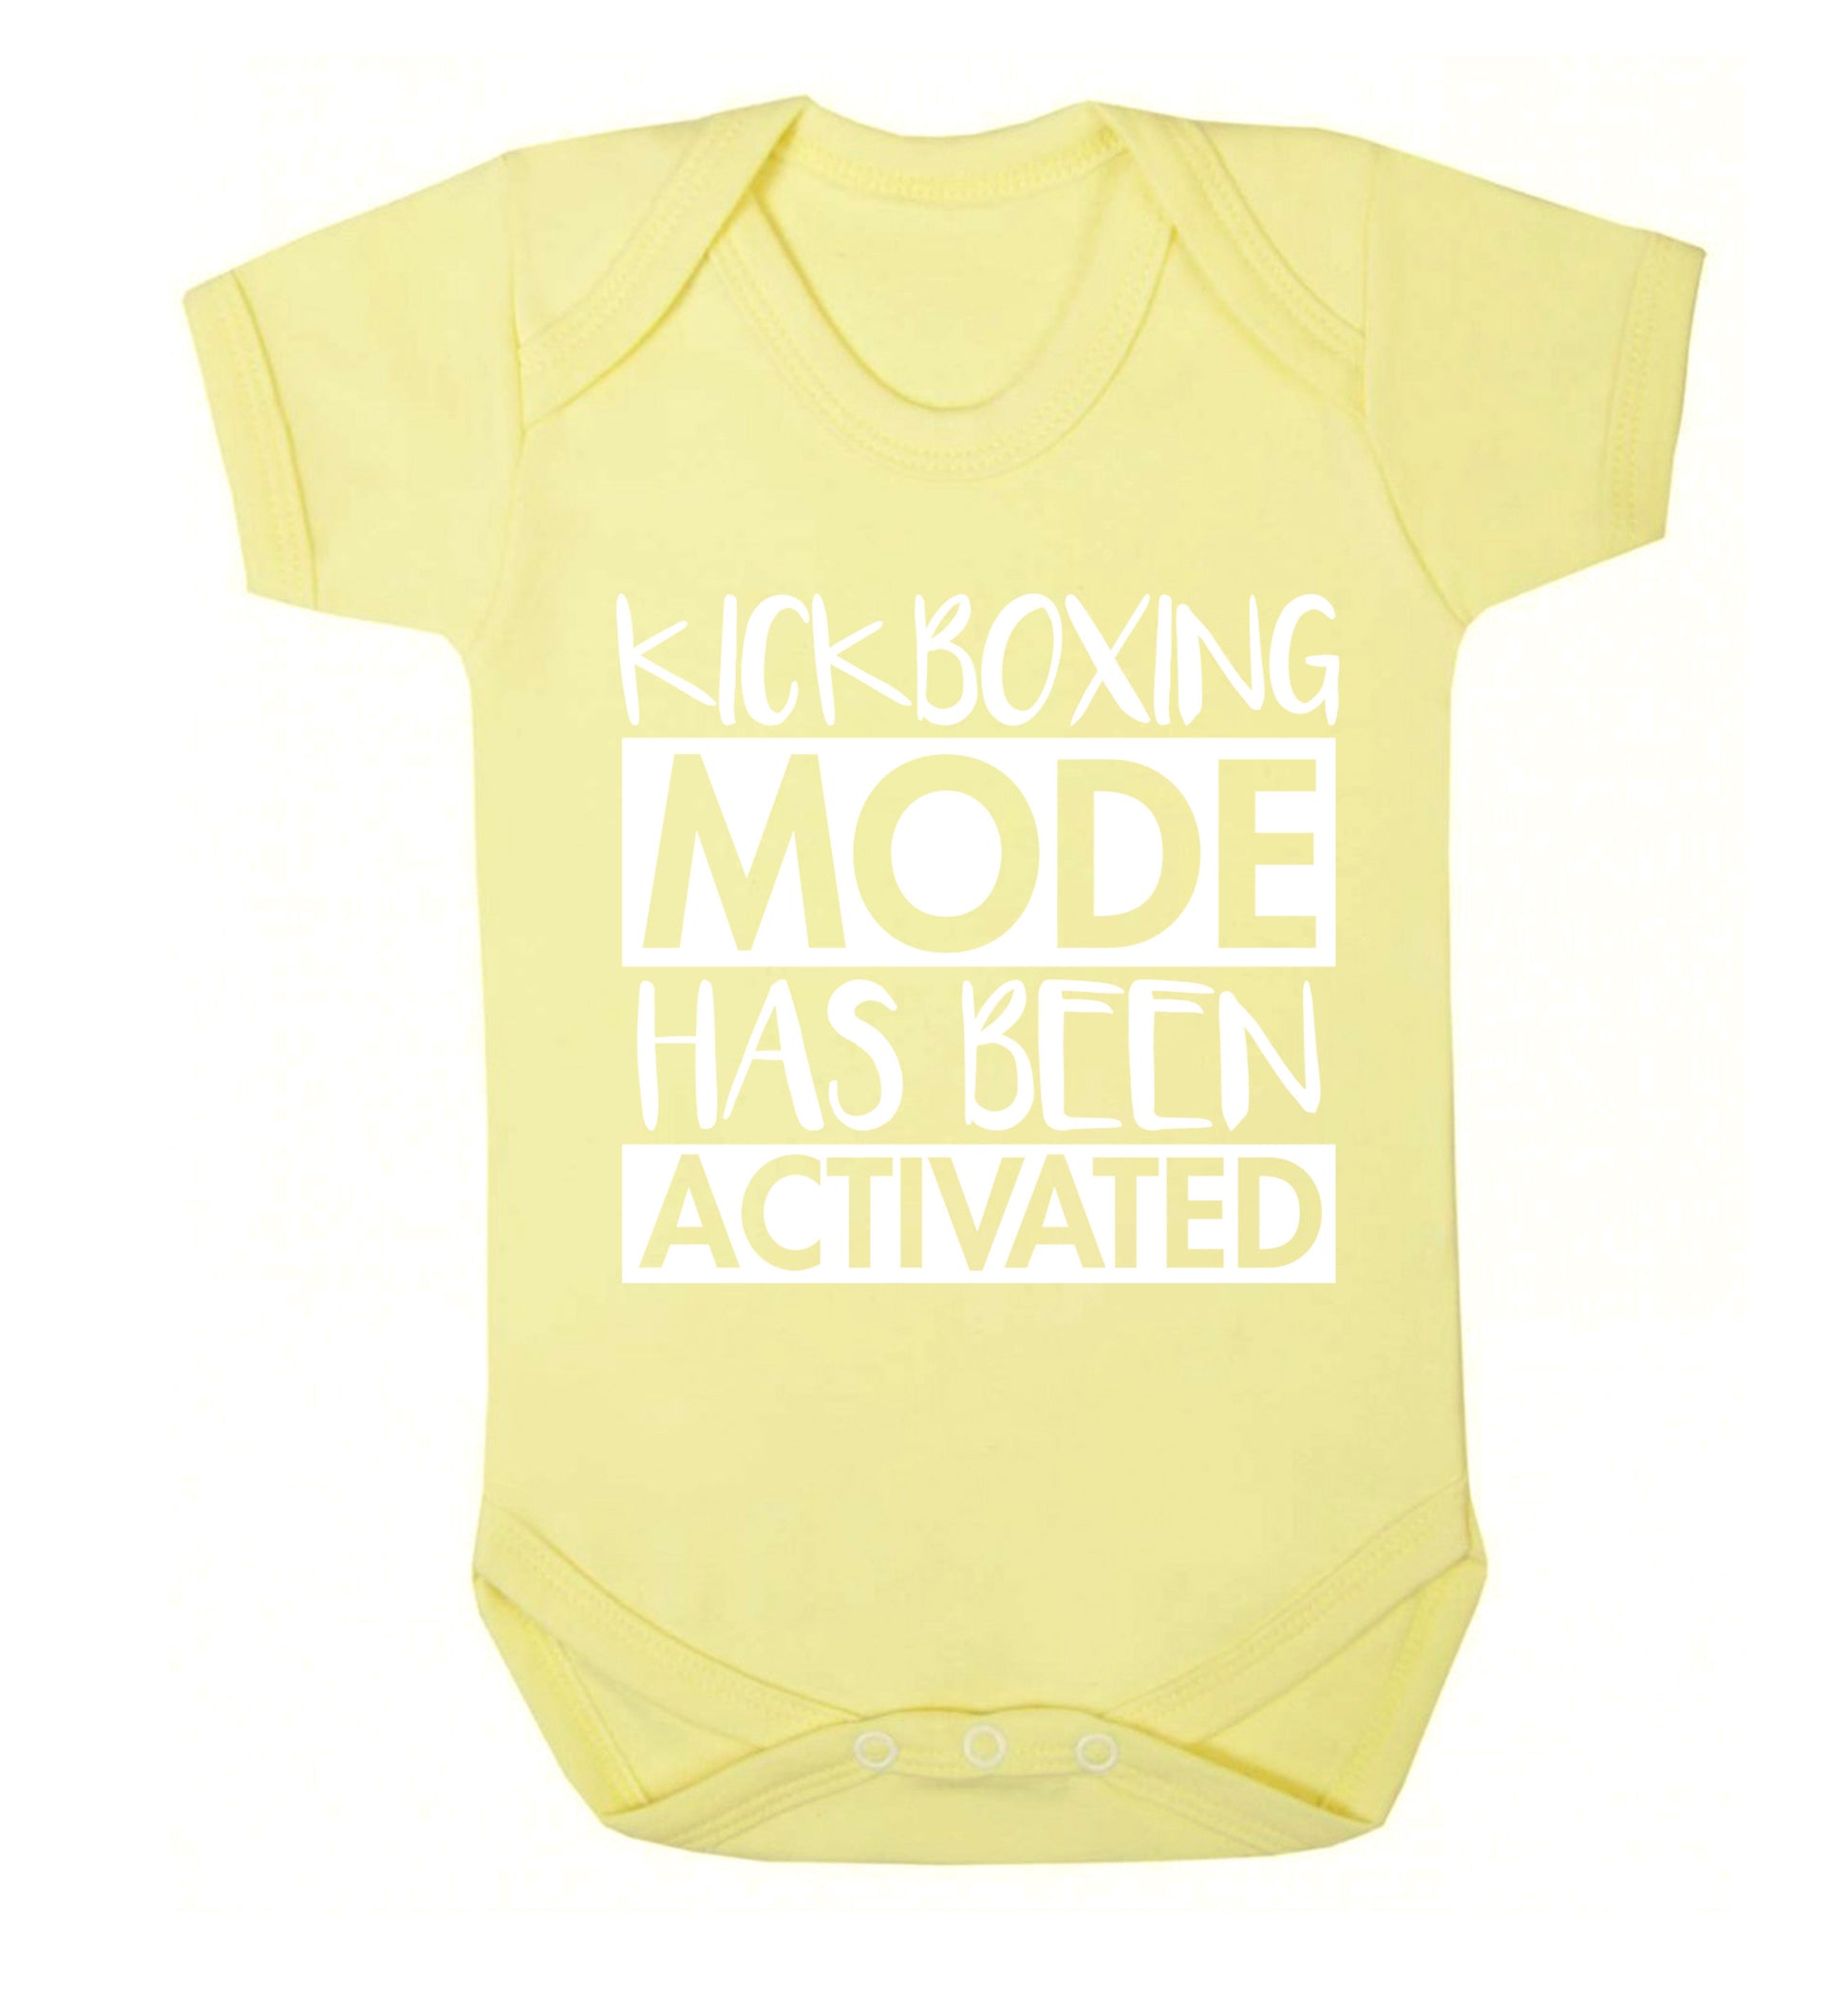 Kickboxing mode activated Baby Vest pale yellow 18-24 months